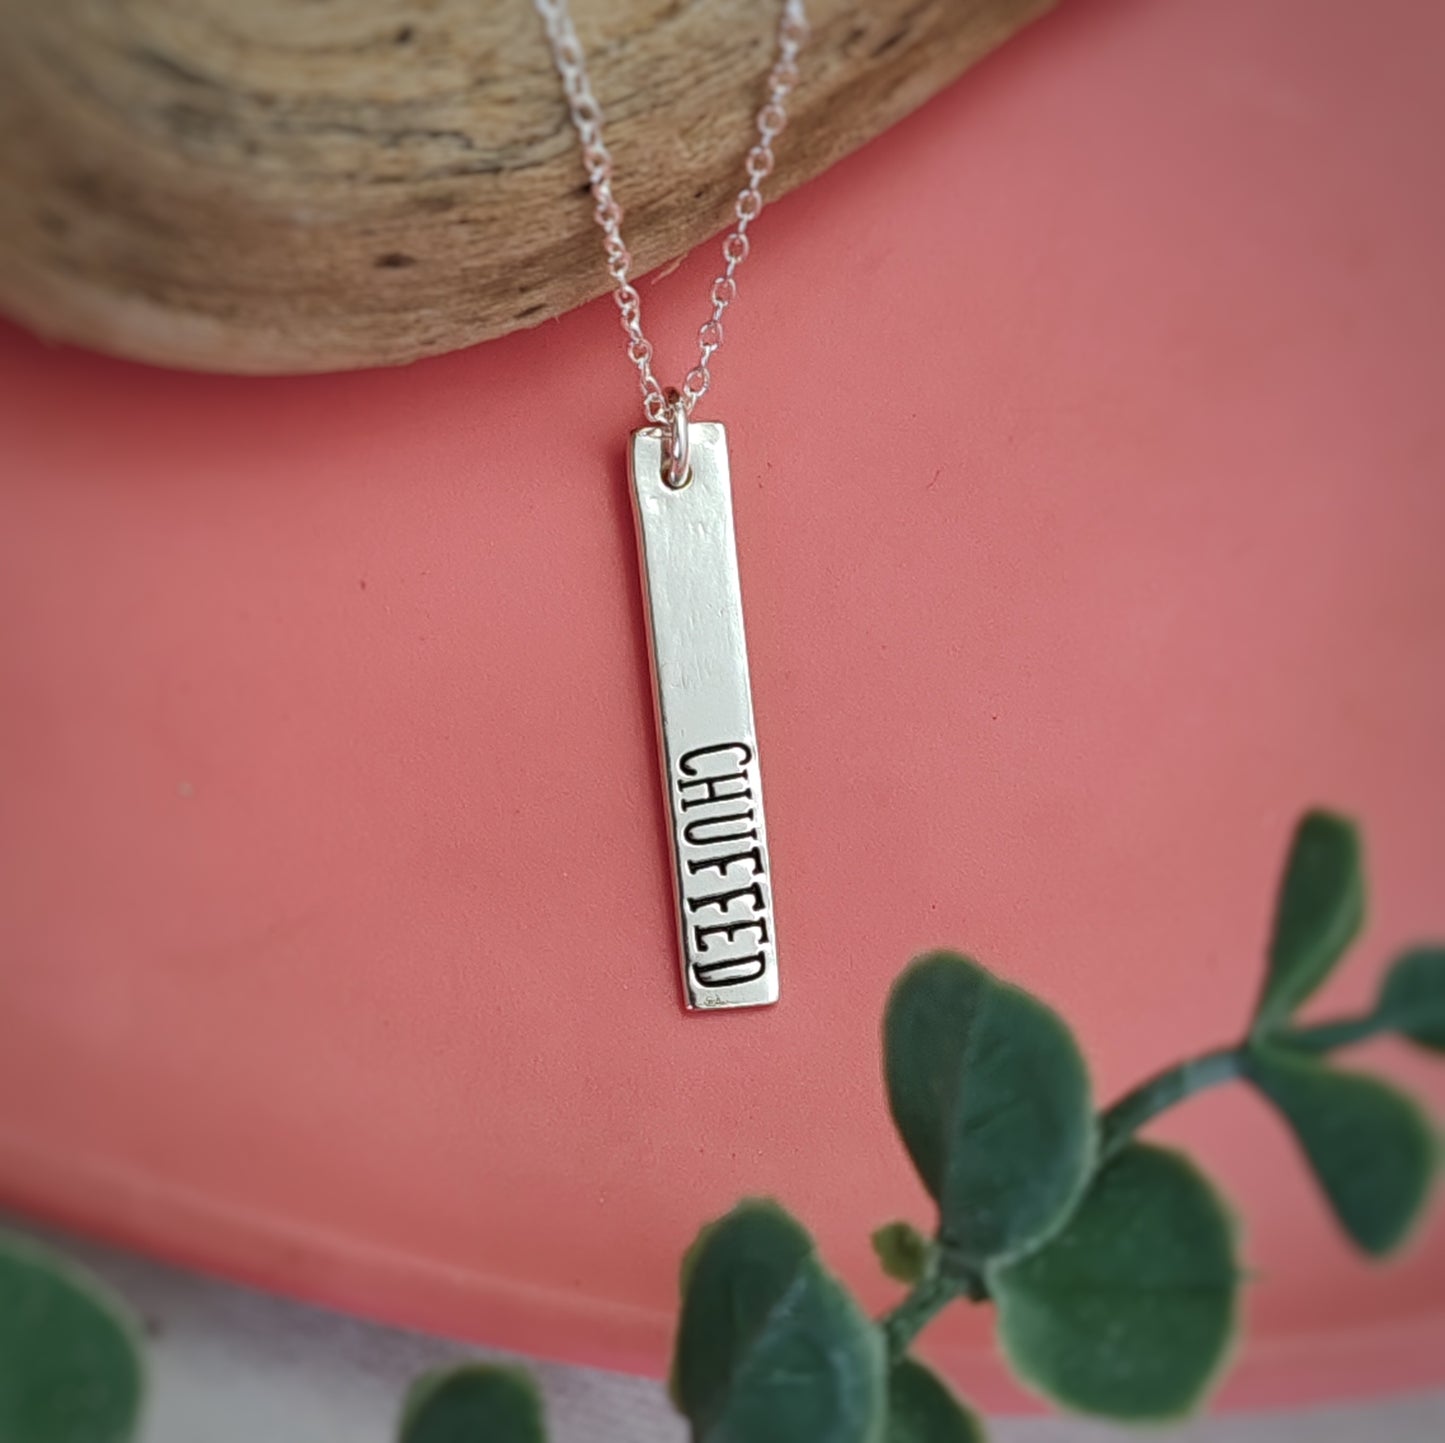 Yorkshire Sayings Necklace - Chuffed